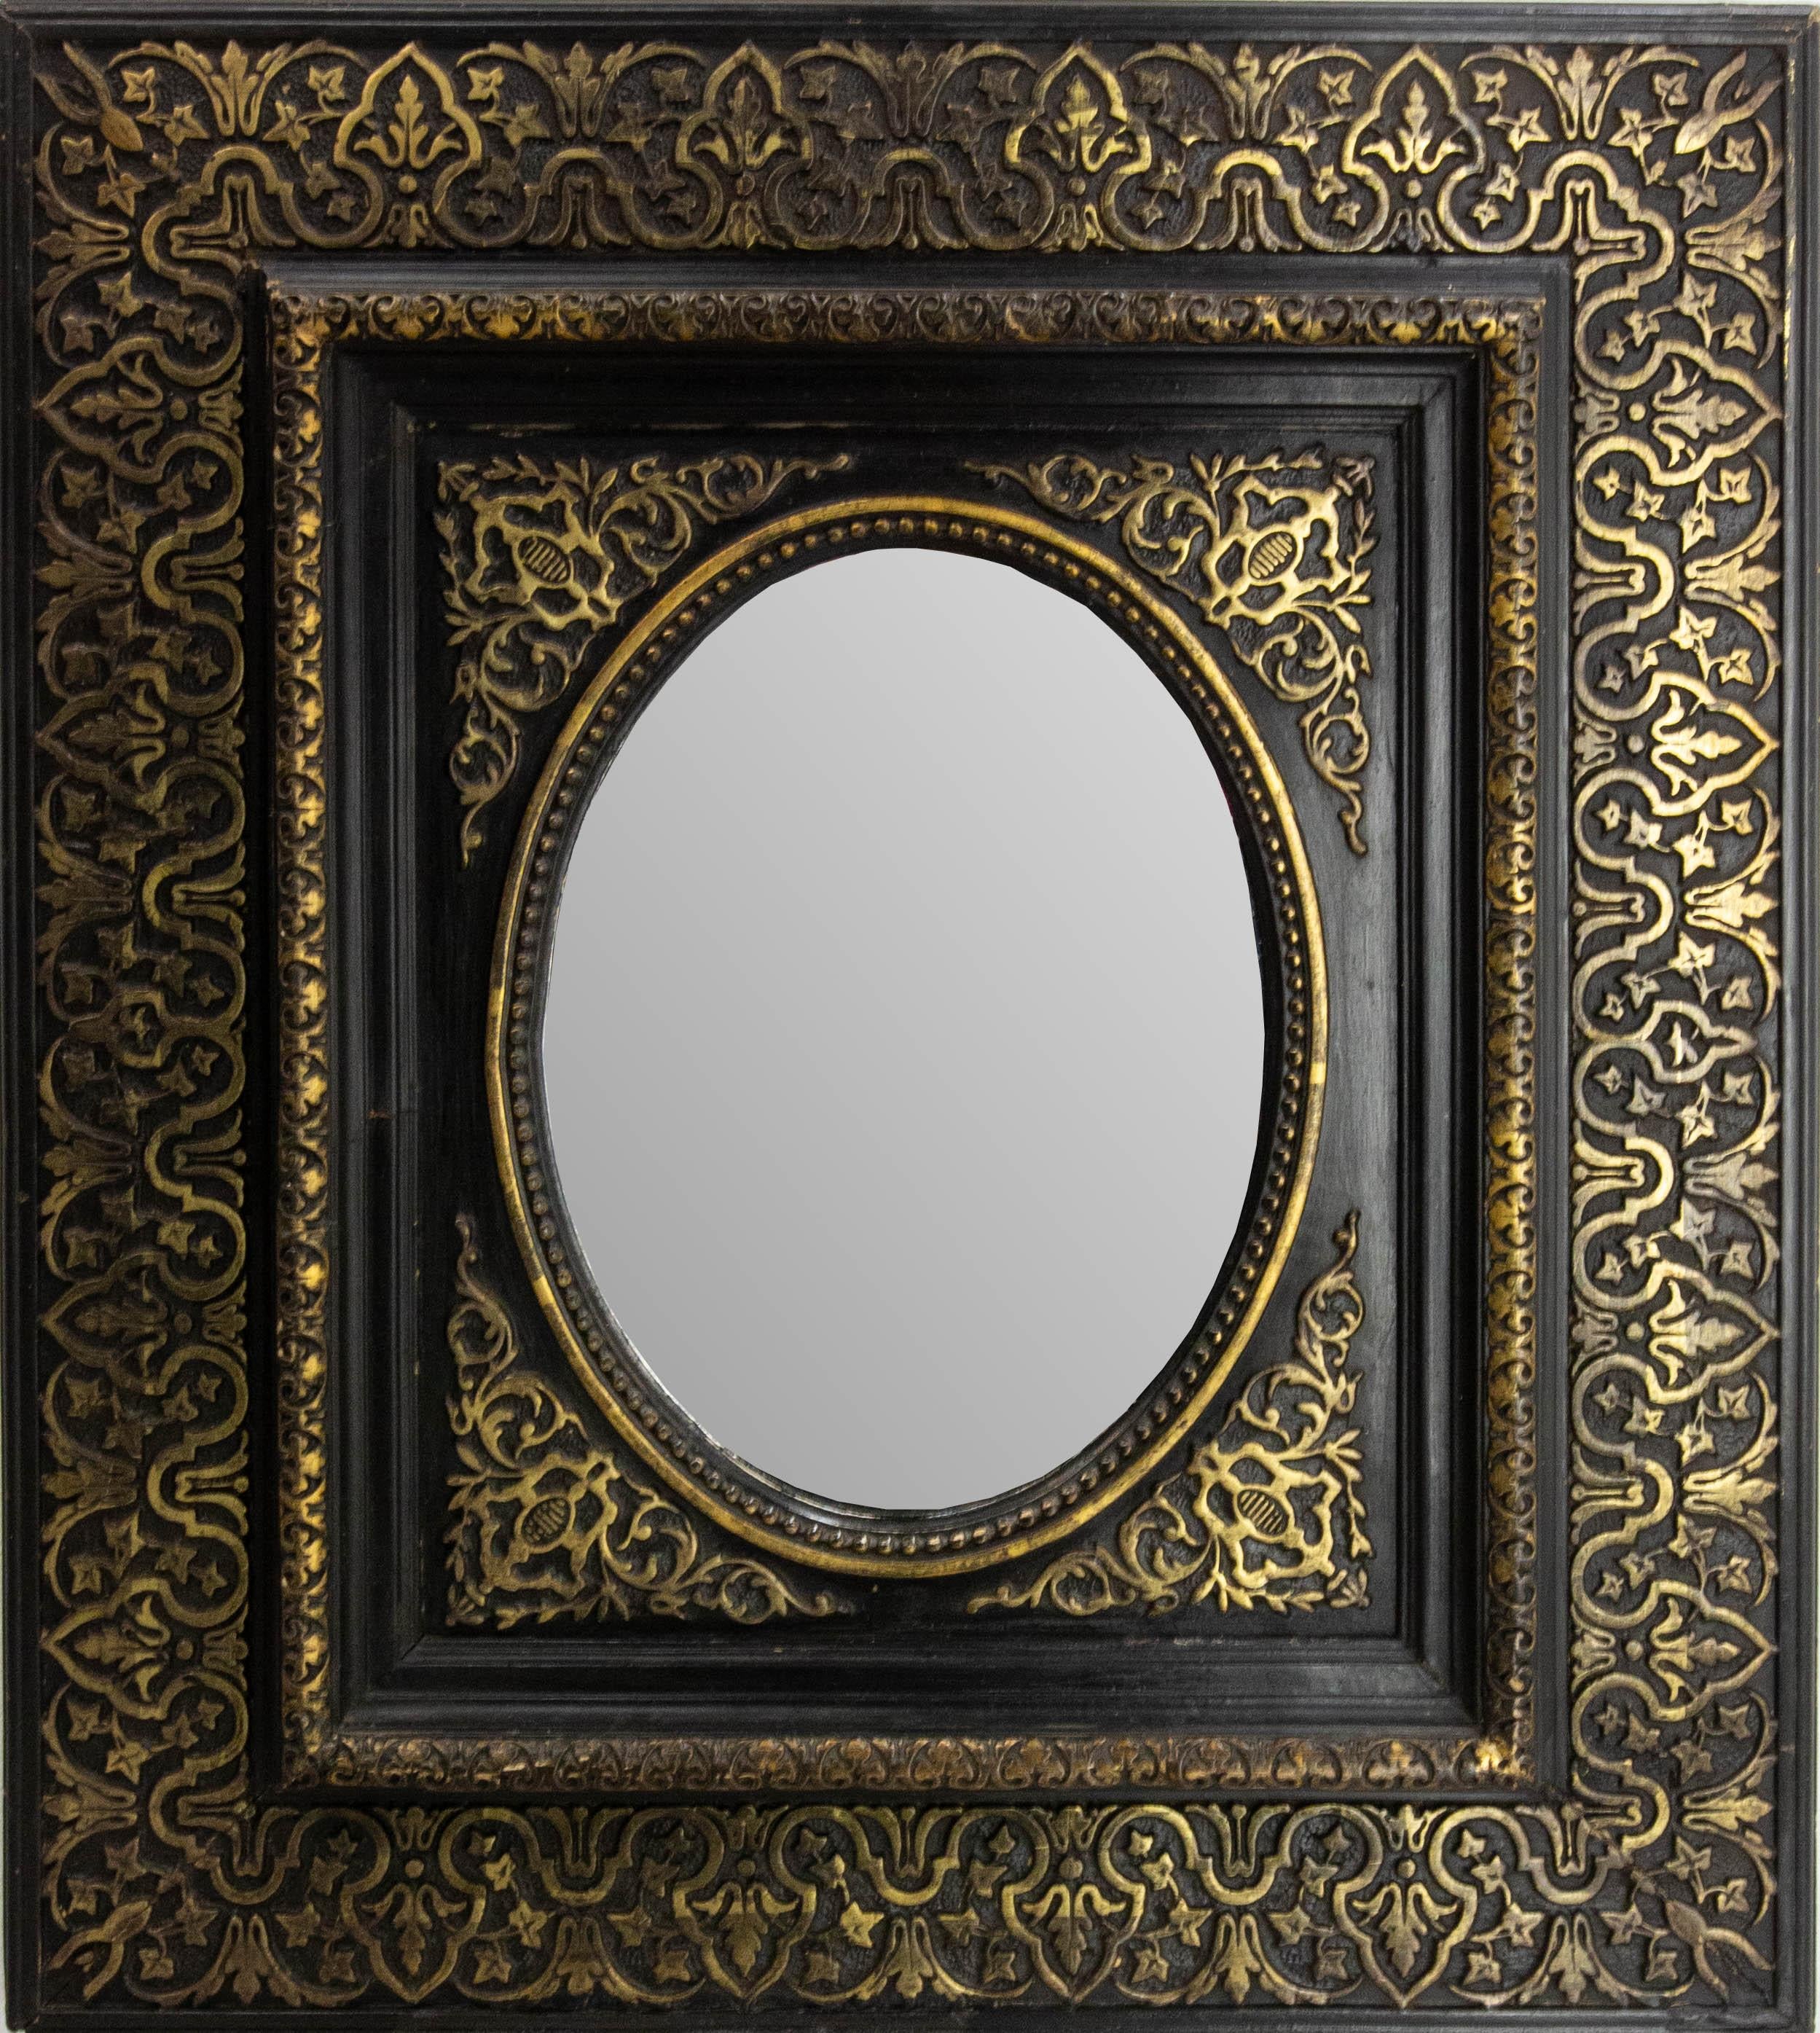 French Stucco & Wood Napoleon III Wall Mirror Golden & Black Oriental St, c 1880 For Sale 1